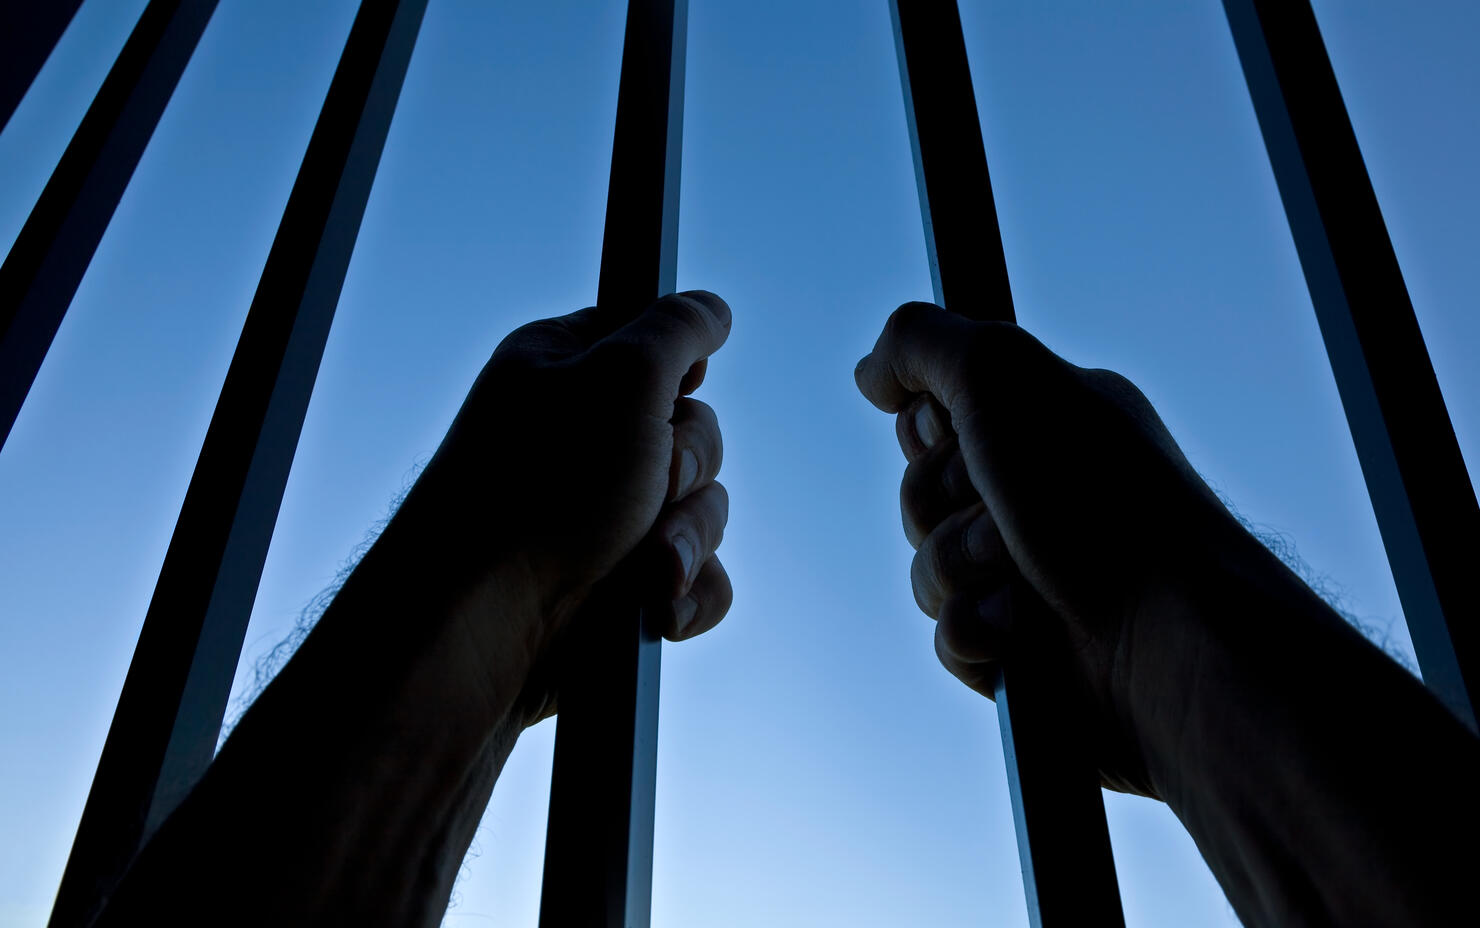 Silhouette of Hands Behind Jail Bars Against Clear Blue Sky